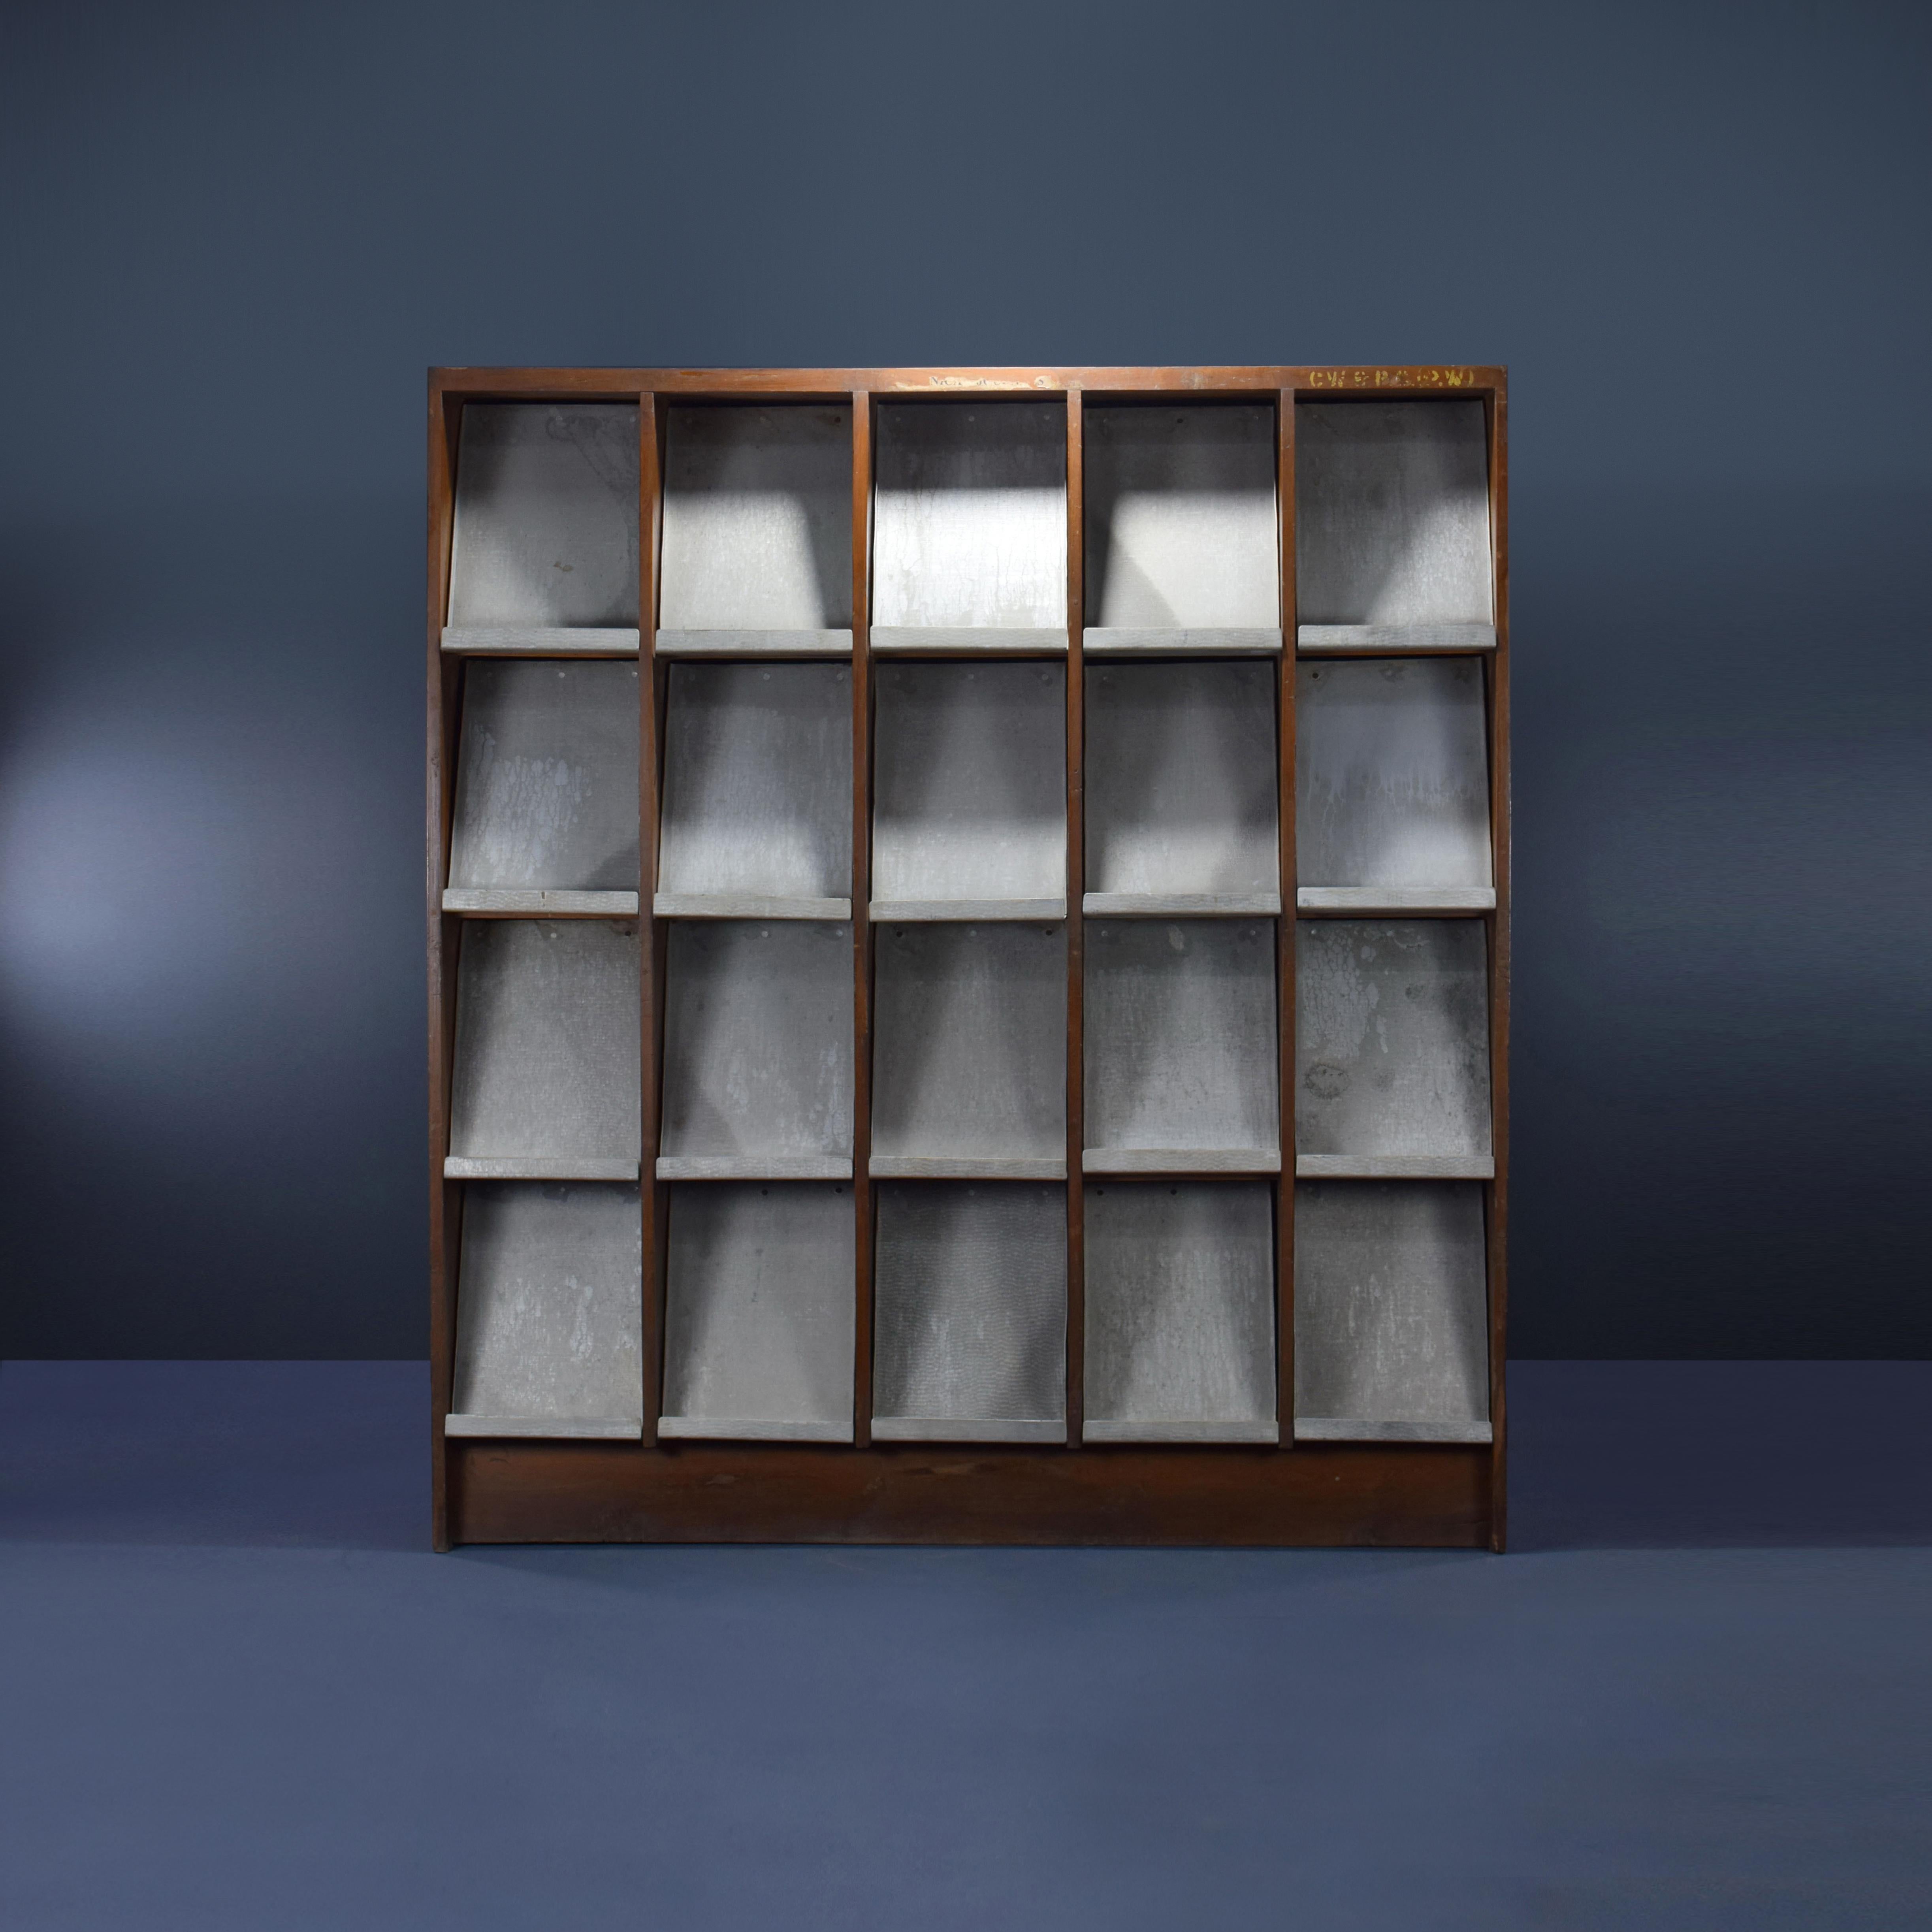 This periodical bookcase is not only a fantastic piece, it’s a design icon. Finally, it’s the most radical item of all Chandigarh items. It has very sculptural qualities, like a facade of brutalist buildings by Le Corbusier. There is something very